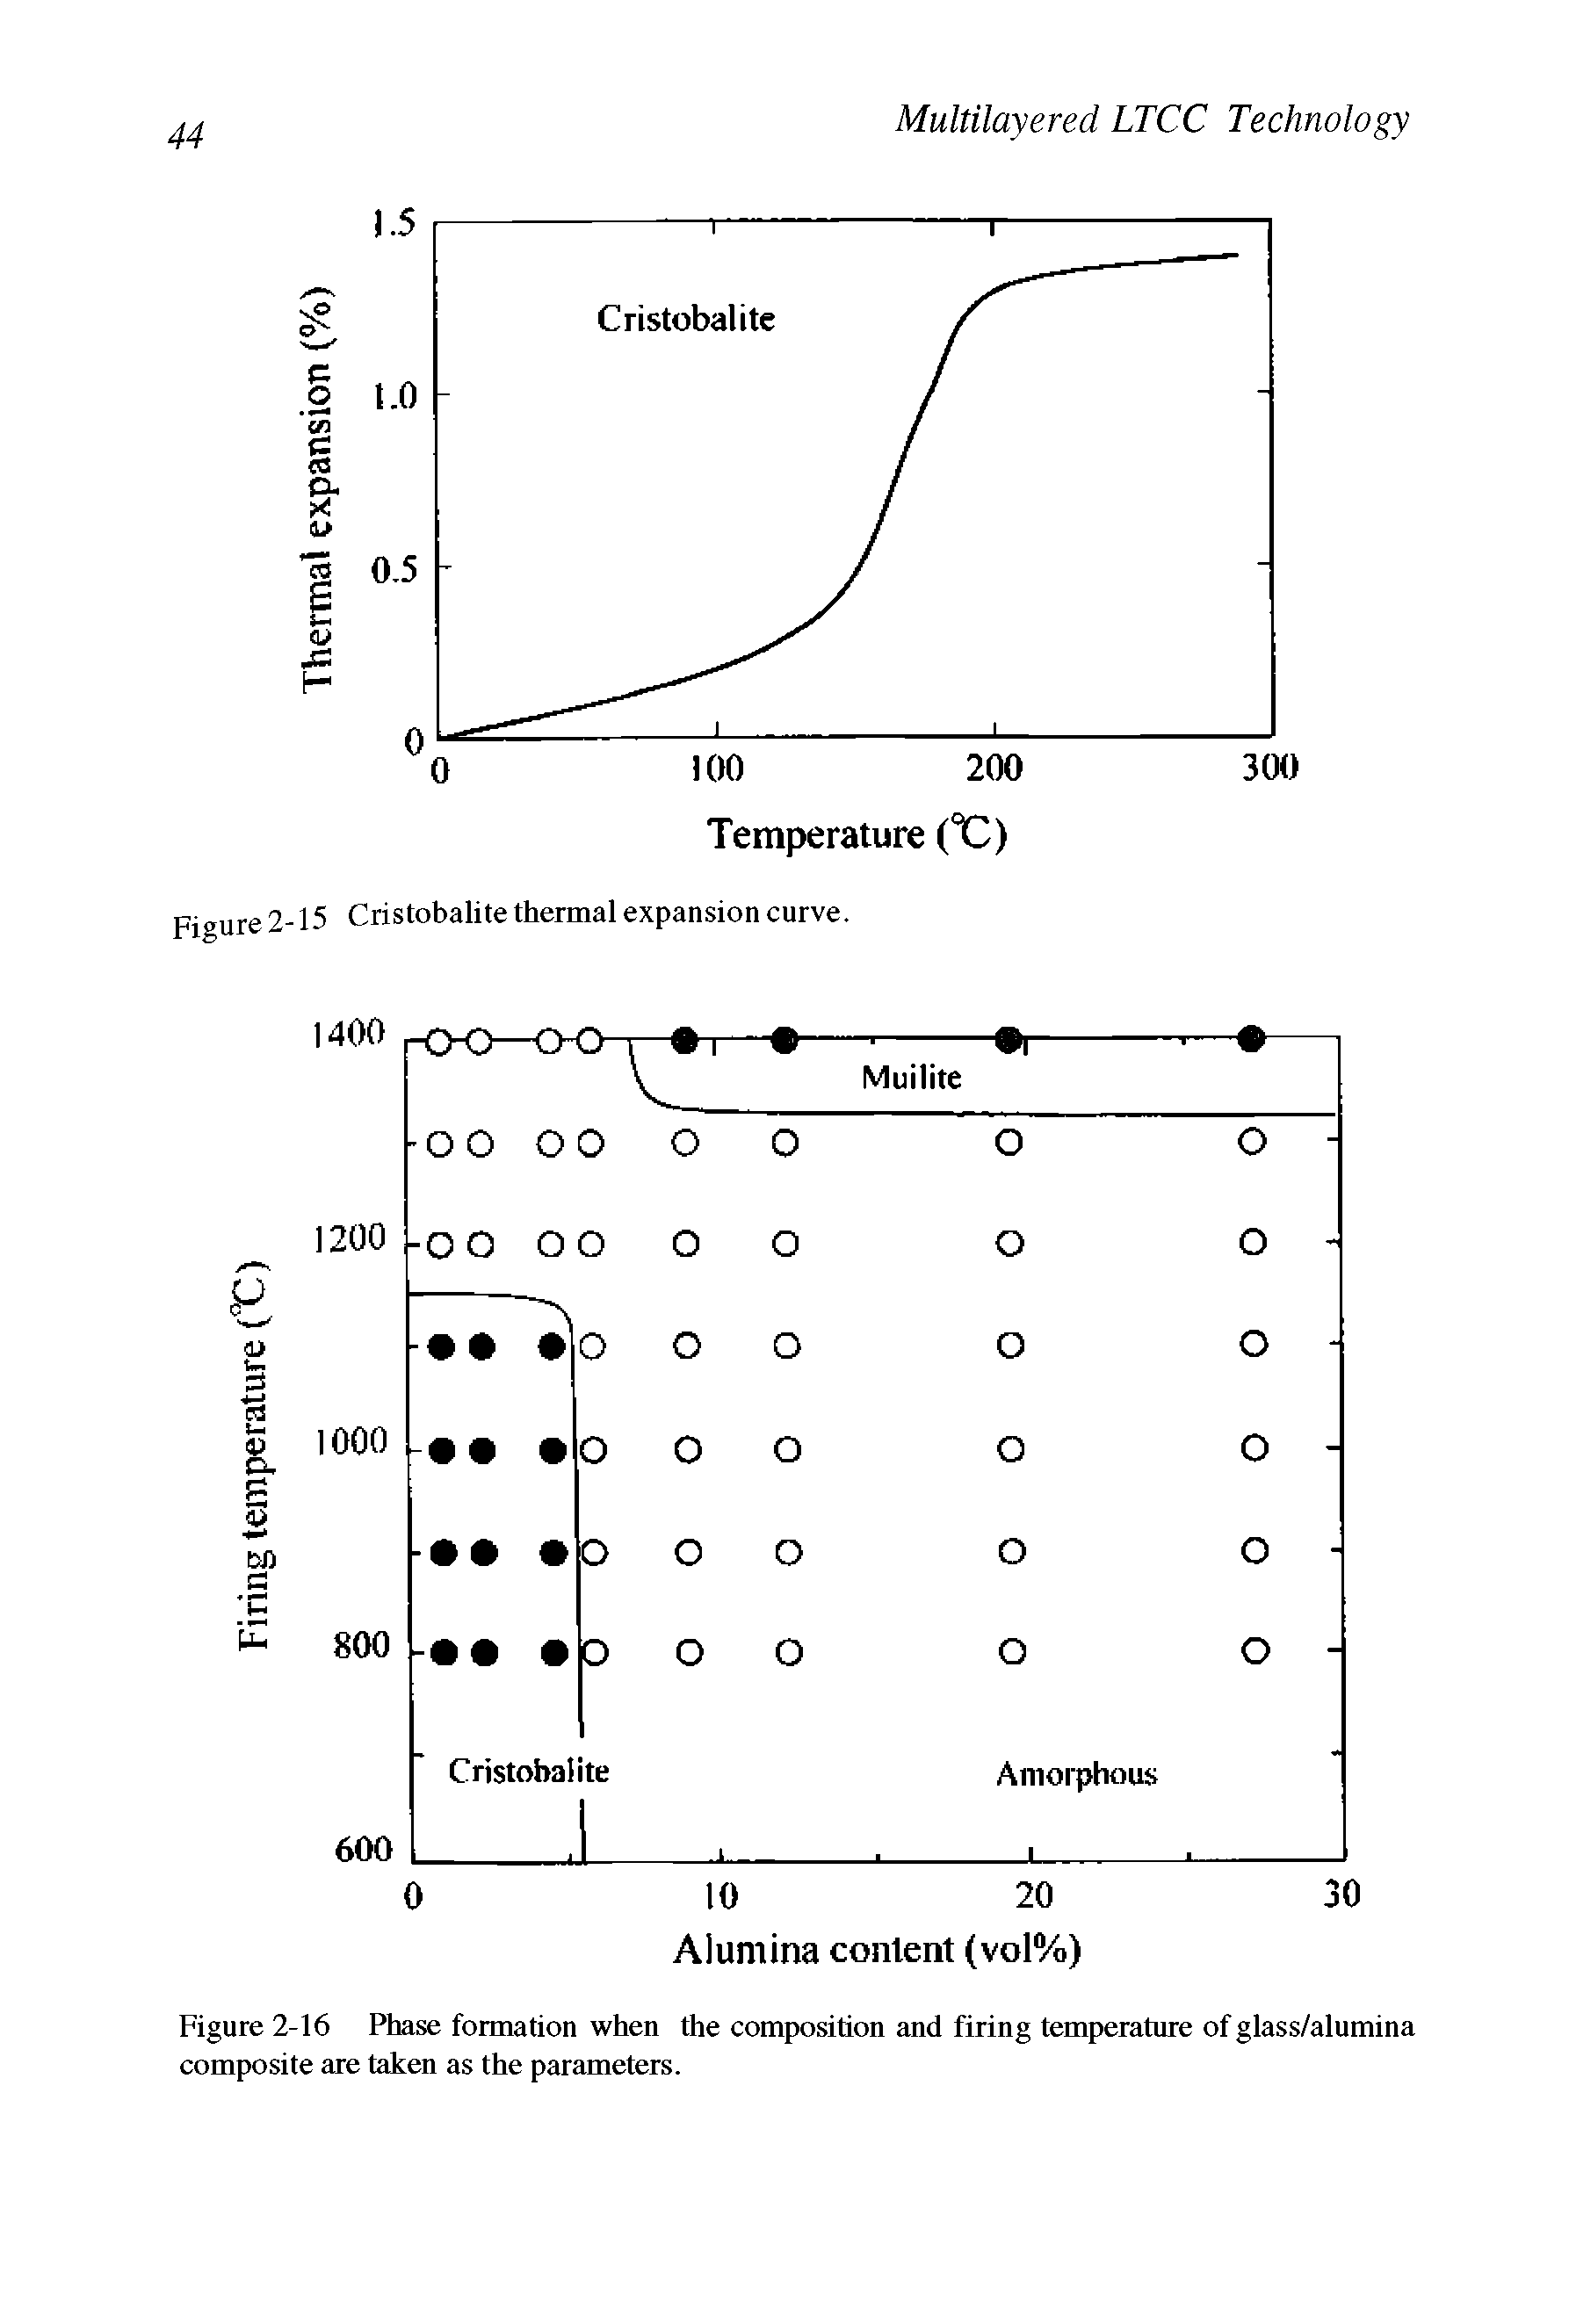 Figure 2-16 Phase formation when the composition and firing temperature of glass/alumina composite are taken as the parameters.